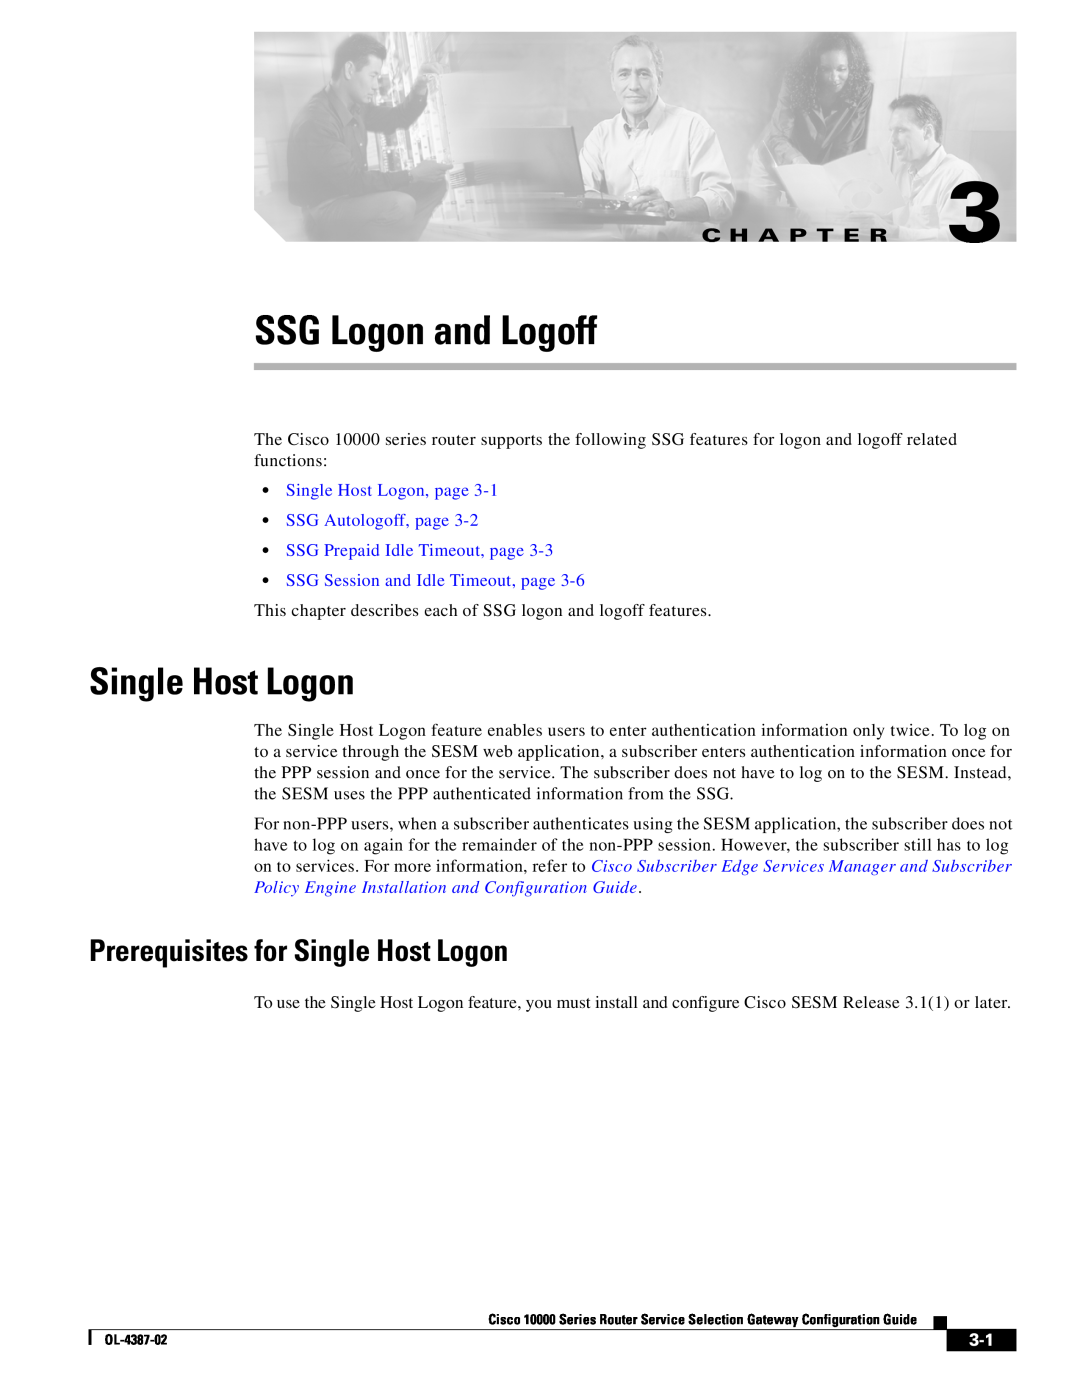 Cisco Systems OL-4387-02 manual SSG Logon and Logoff, Prerequisites for Single Host Logon, C H A P T E R 